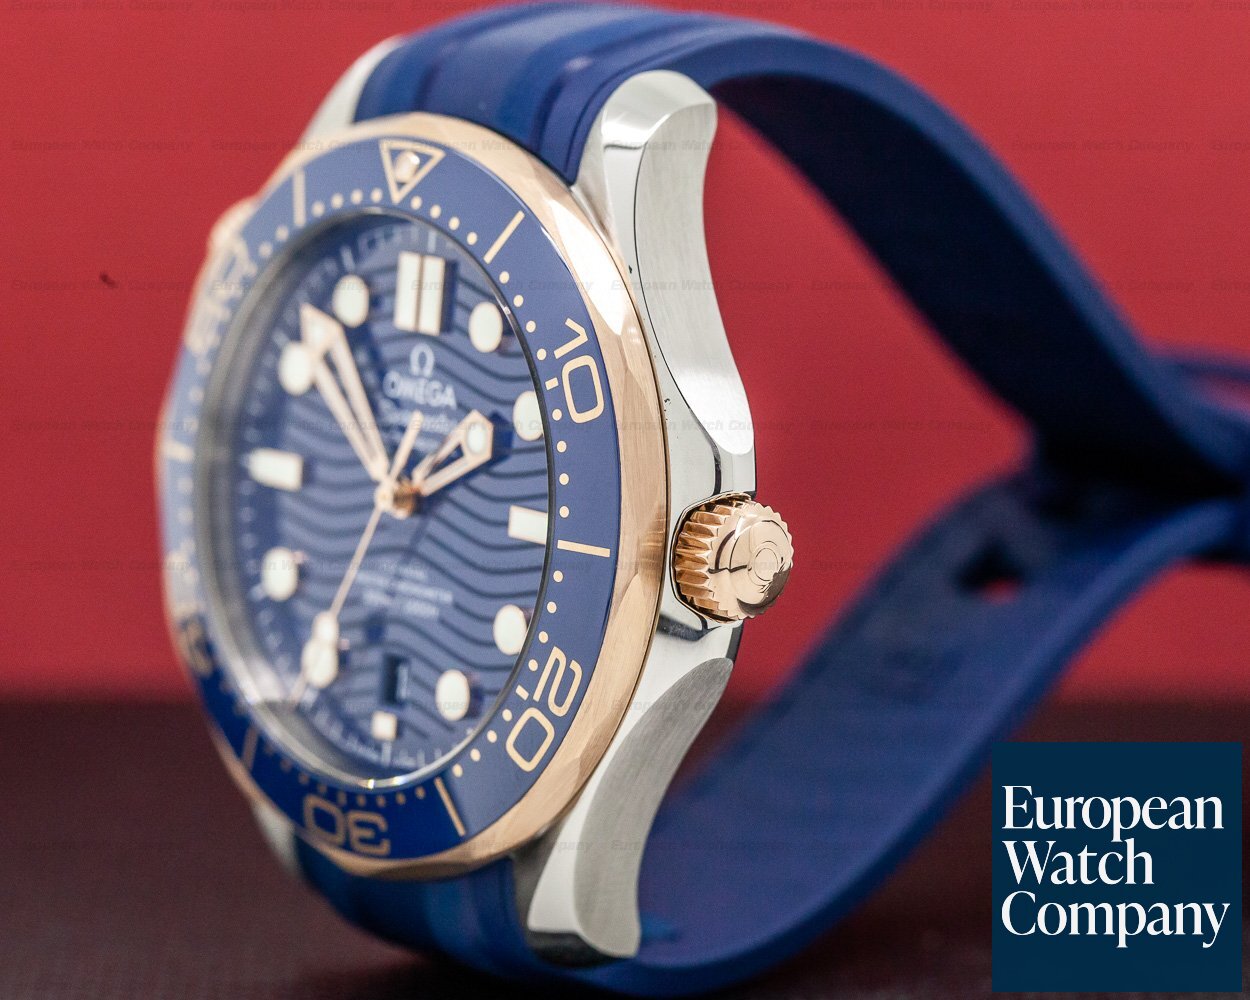 Omega Seamaster Diver 300M Steel and Rose Gold Co-Axial Master Chronometer Ref. 210.22.42.20.03.002